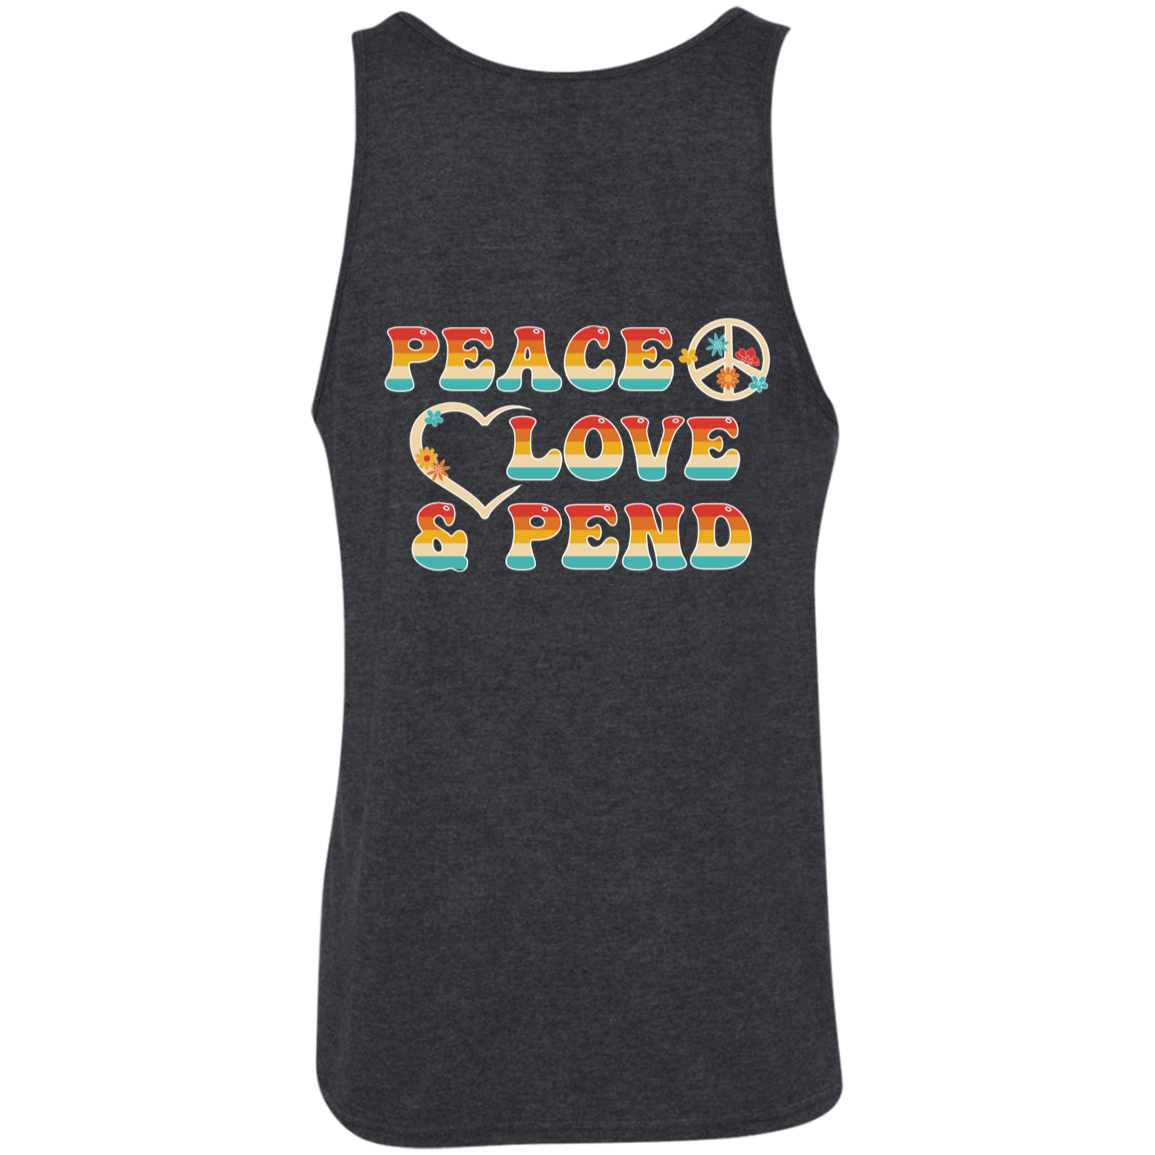 Peace, Love & Pend (Front & Back) - Tank